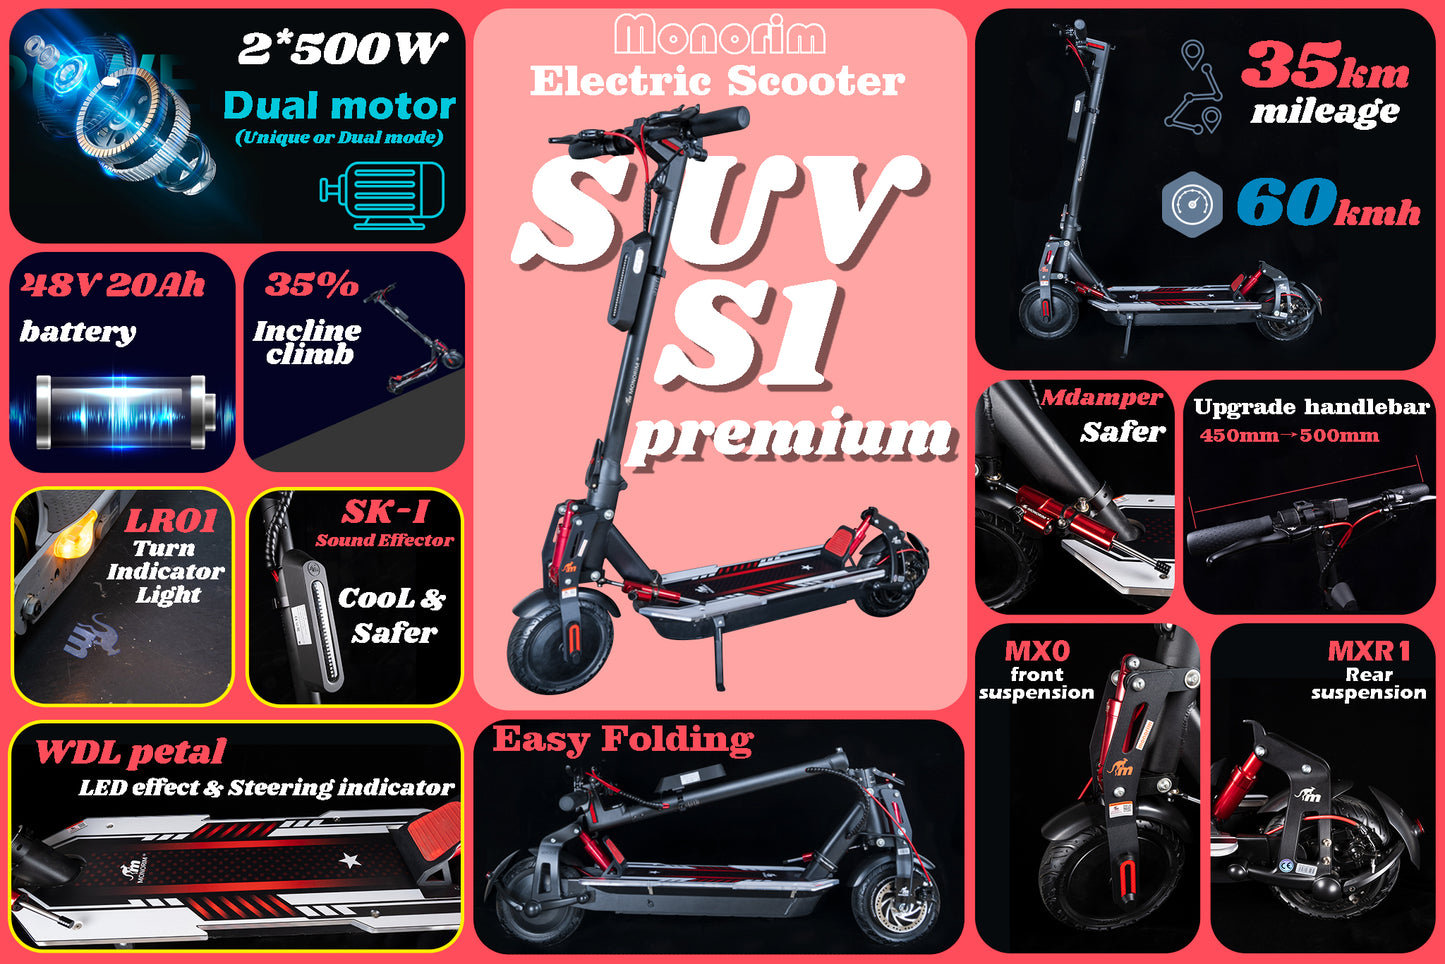 Monorim SUV S1  48v LS/NLpower  Cells Batteries 1000w Dual drive electric scooter (external handle bar 500mm ) 2022year best city of road killer option model(without shipcost)